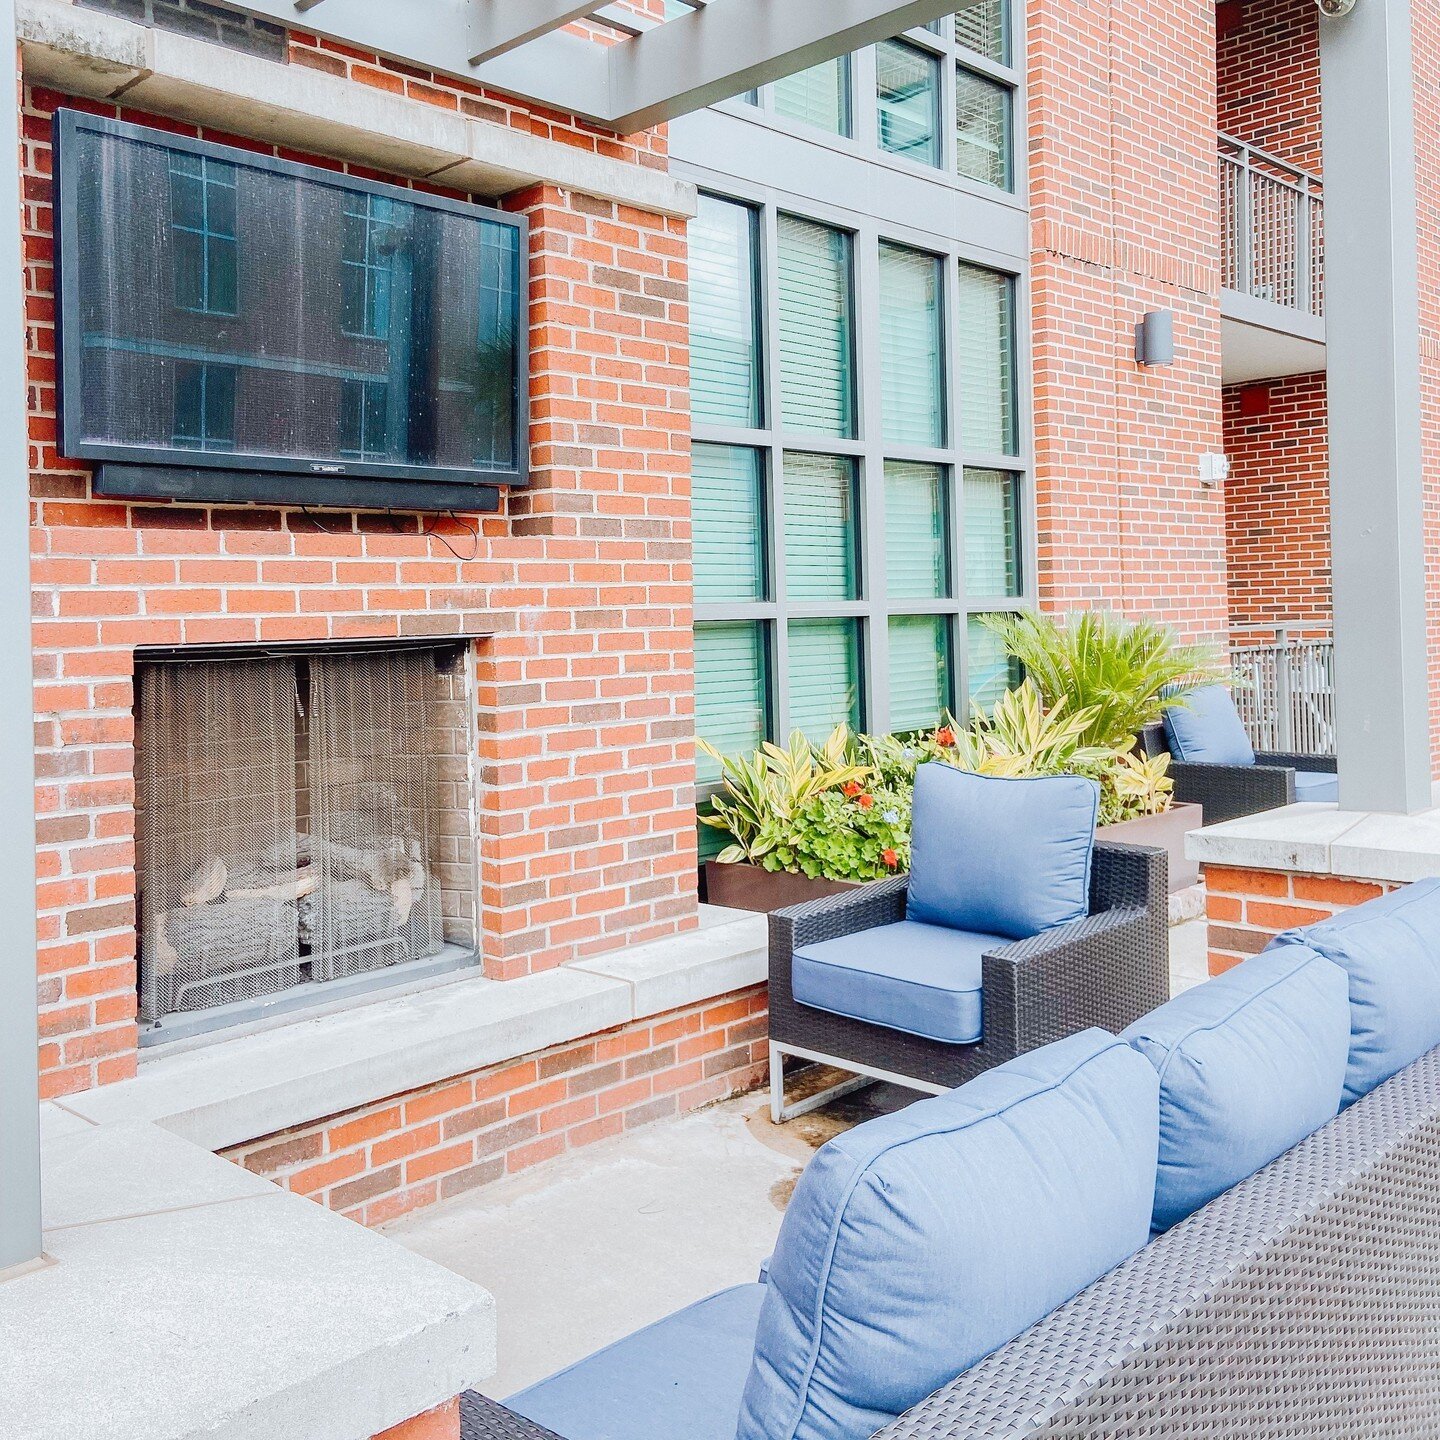 Cozy up by the fire and catch up on your favorite shows. Our pool deck is the perfect spot to relax and unwind, even in the chilly weather! 🔥📺